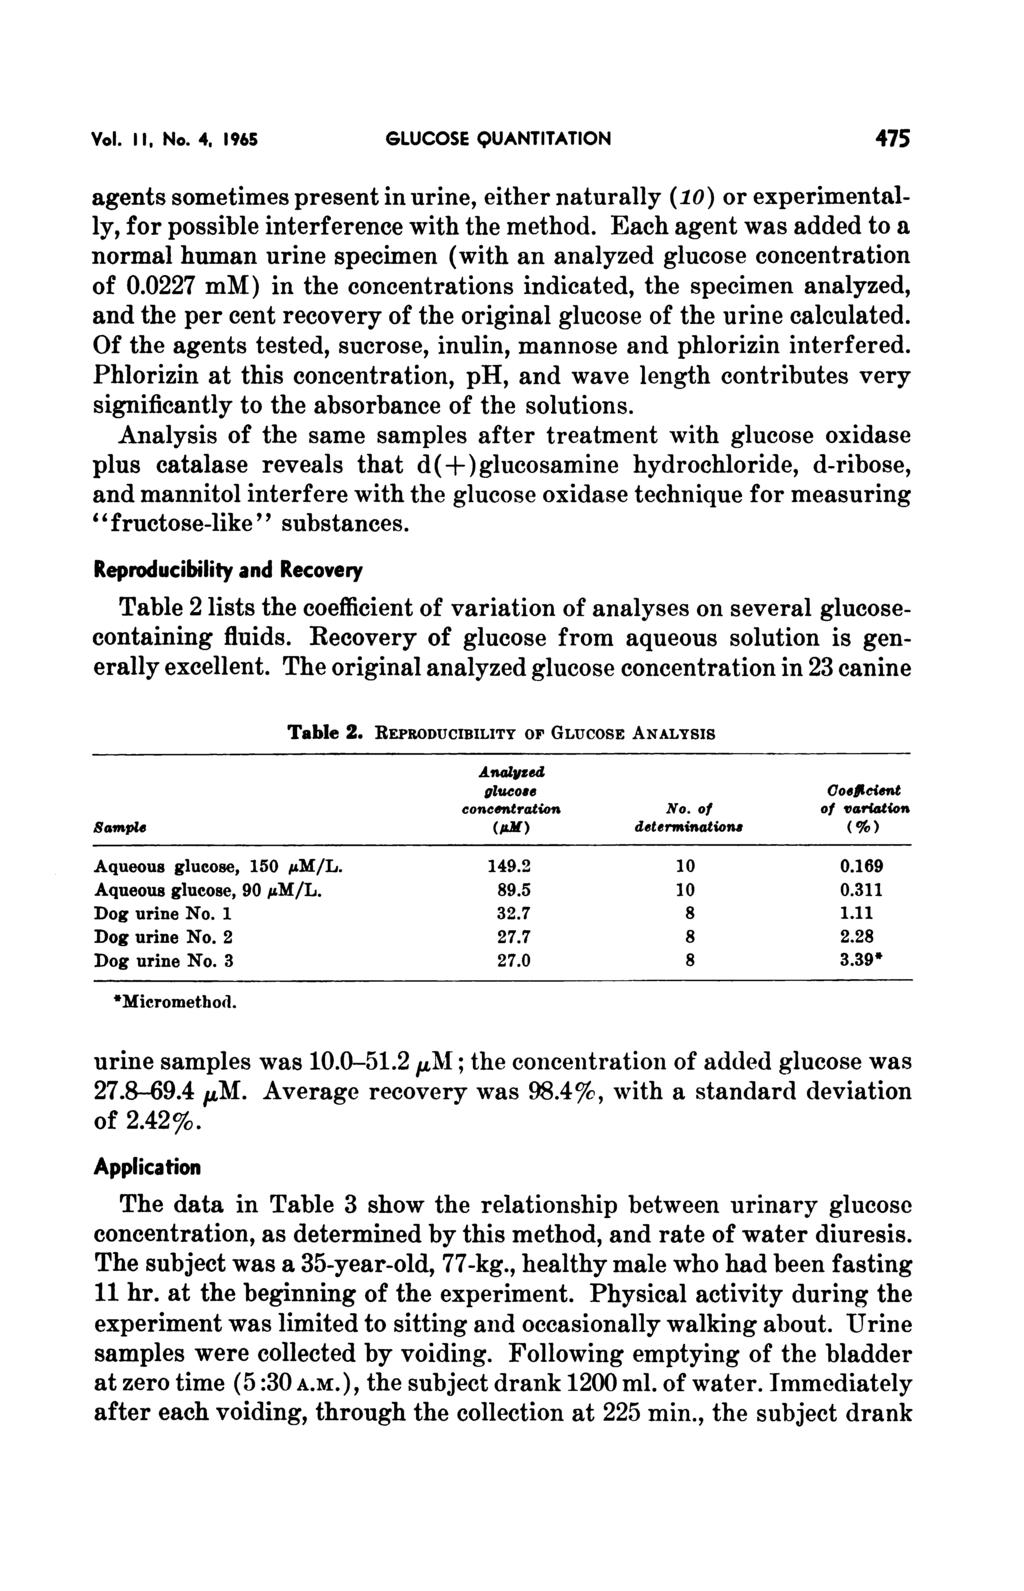 Vol. II, No. 4, 1965 GLUCOSE QUANTITATION 475 agents sometimes present in urine, either naturally (10) or experimentally, for possible interference with the method.